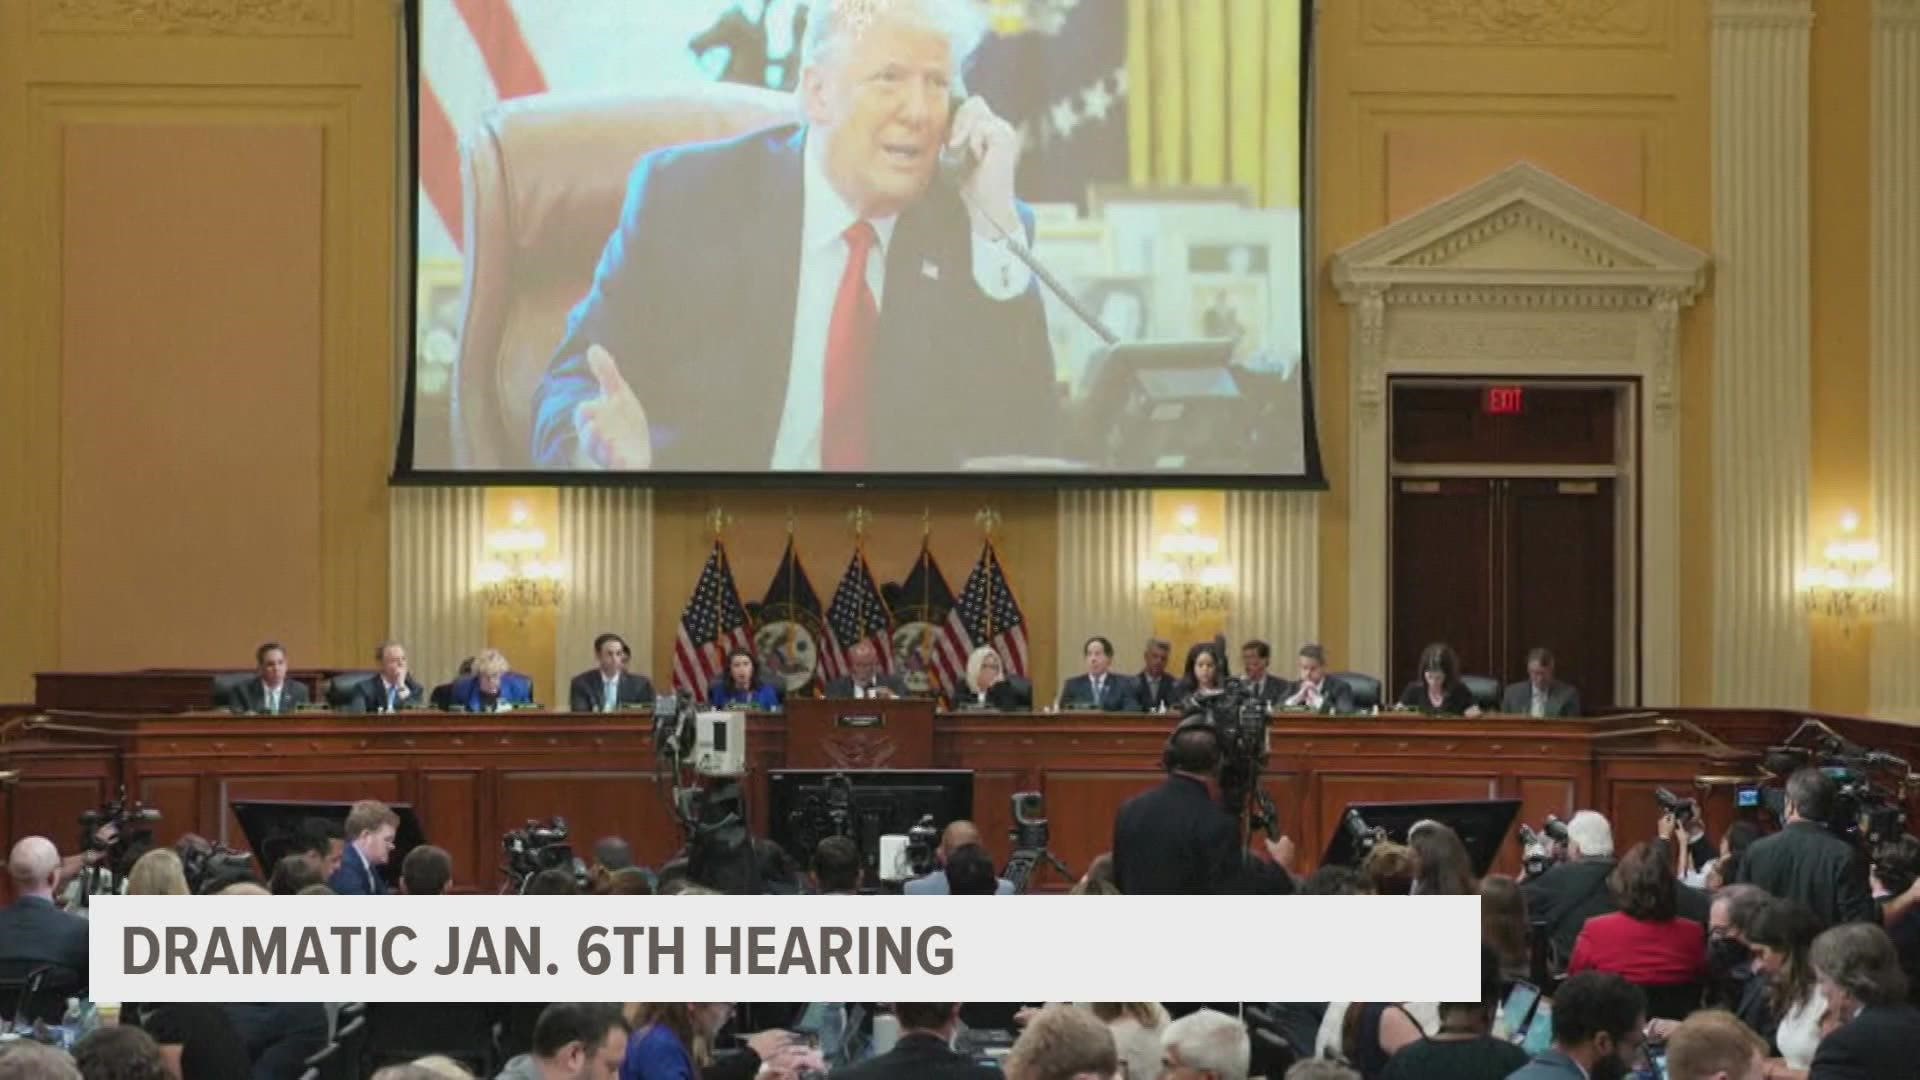 This is the seventh hearing in a series that has presented numerous blockbuster revelations from the Jan. 6 committee.